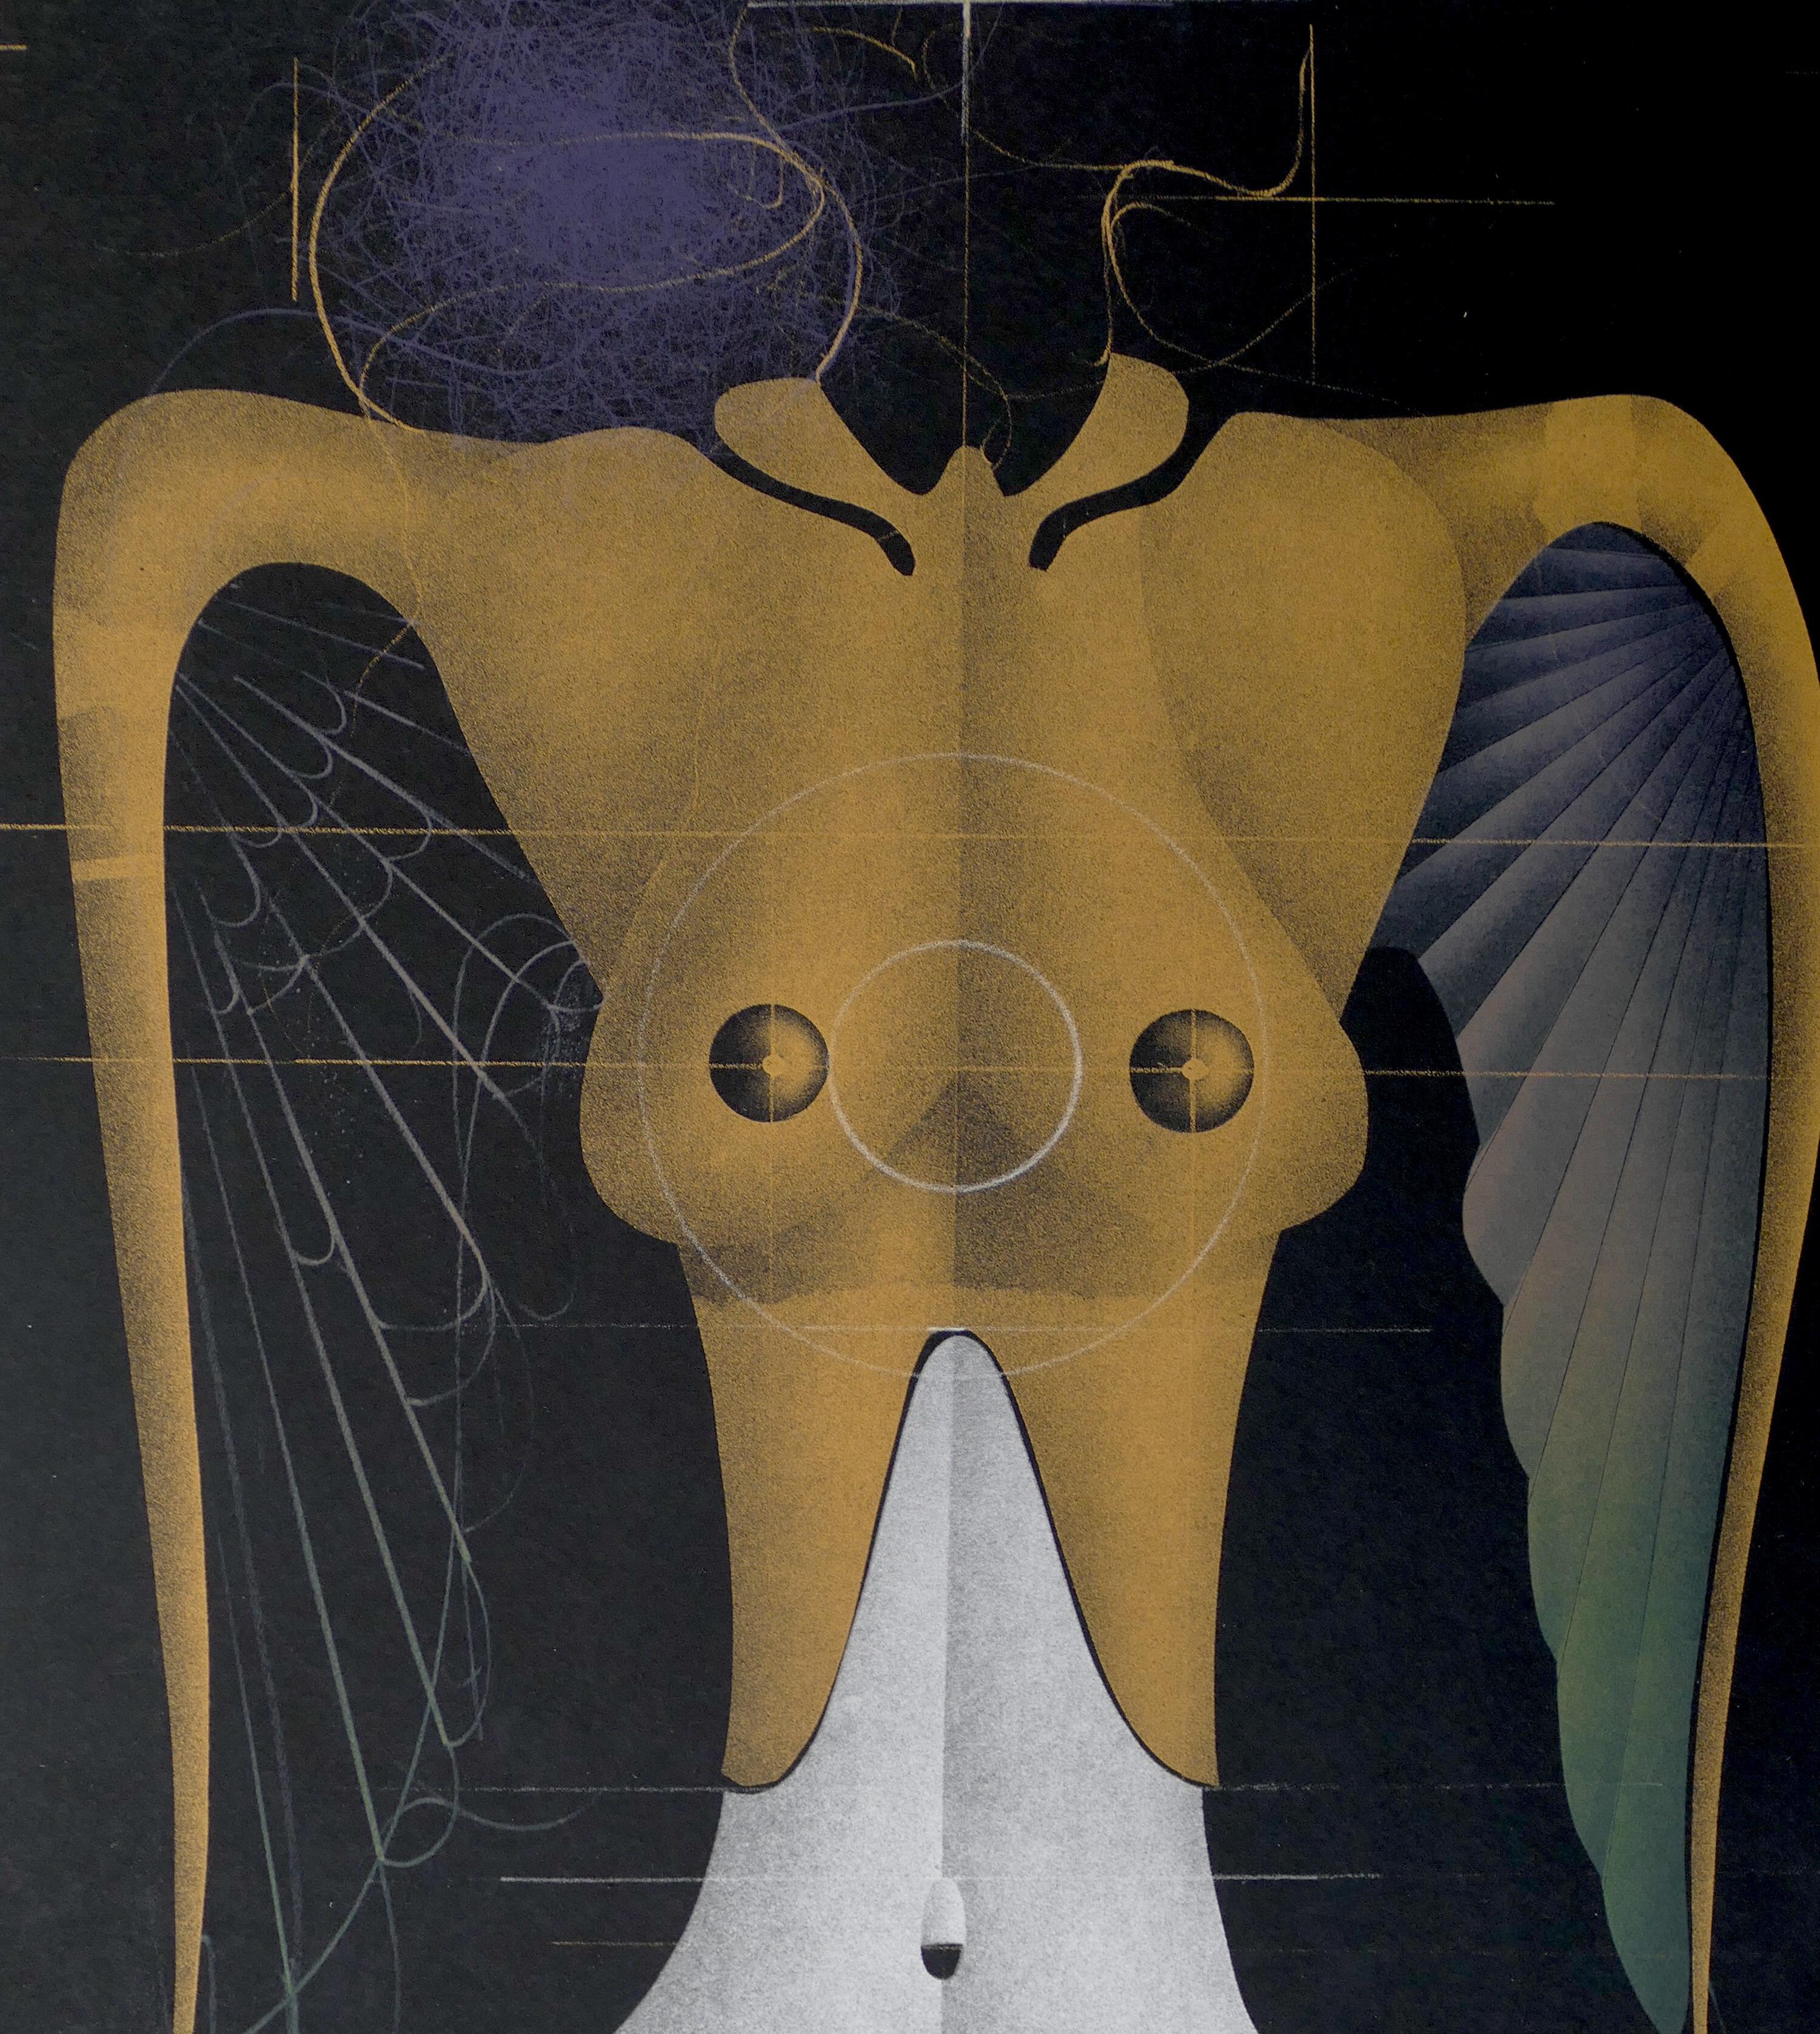 Flying Woman - Original Lithograph by P. Wunderlich - 1977 - Surrealist Print by Paul Wunderlich